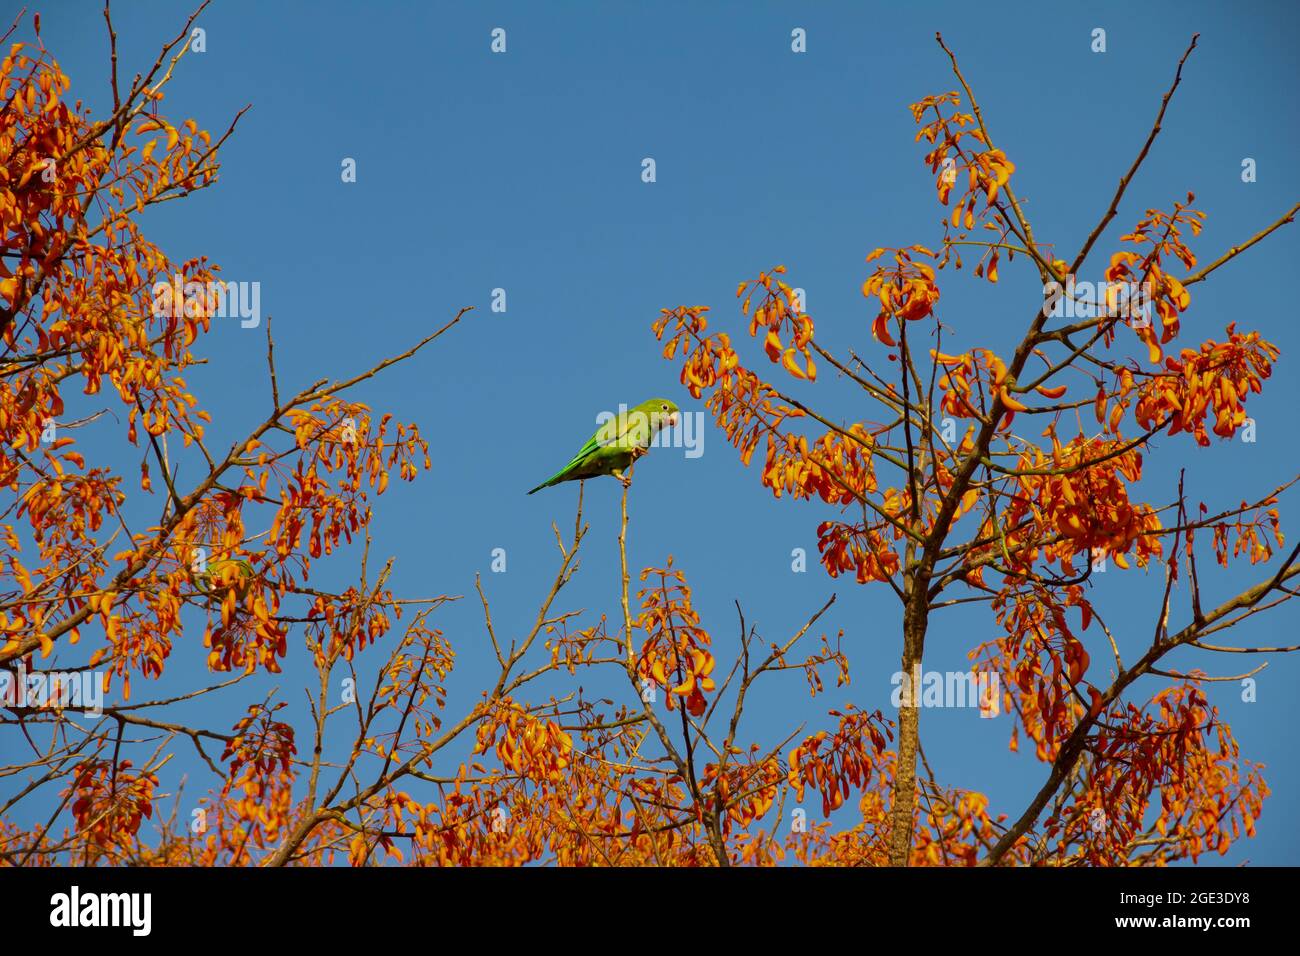 A green parakeet perched on a flowering mulungu branch, feeding, with blue sky in the background. Stock Photo